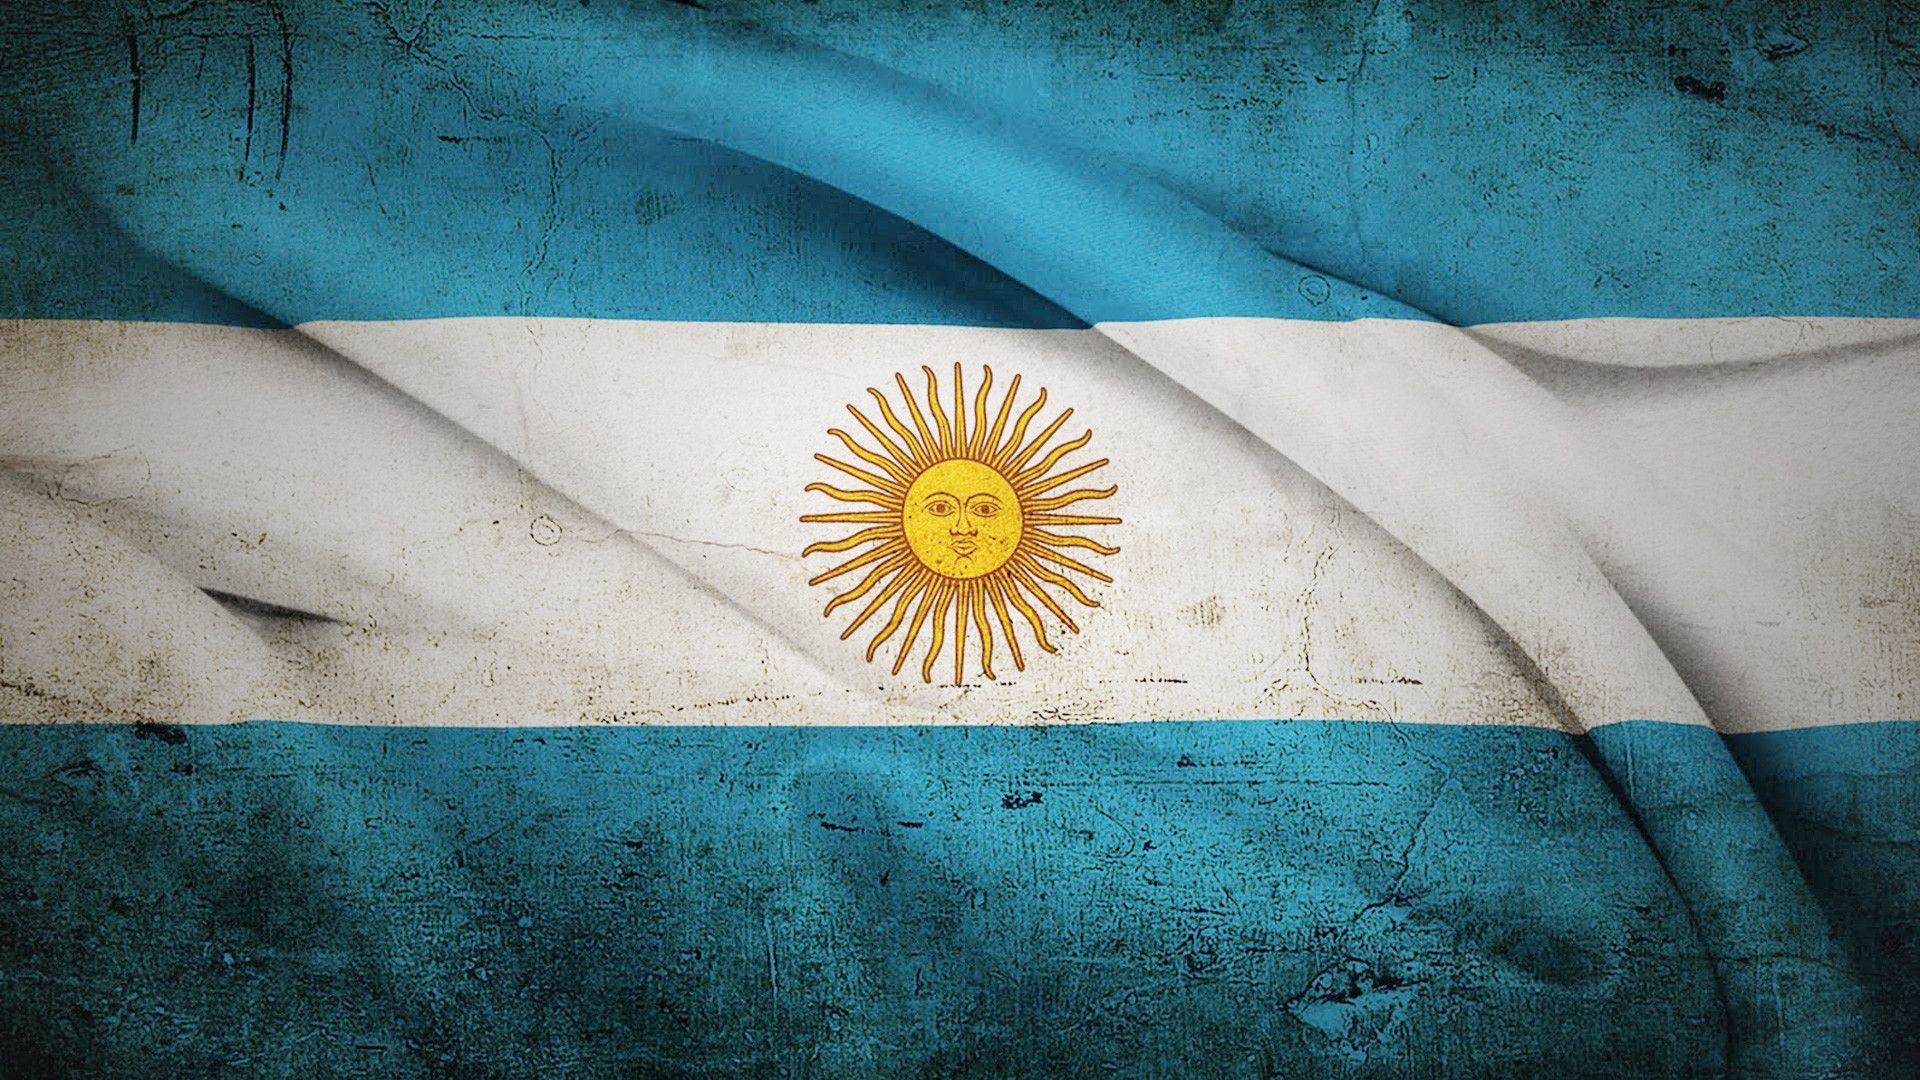 Download Wallpapers Flag Of Argentina  Argentina Flag Hd Iphone PNG Image  with No Background  PNGkeycom